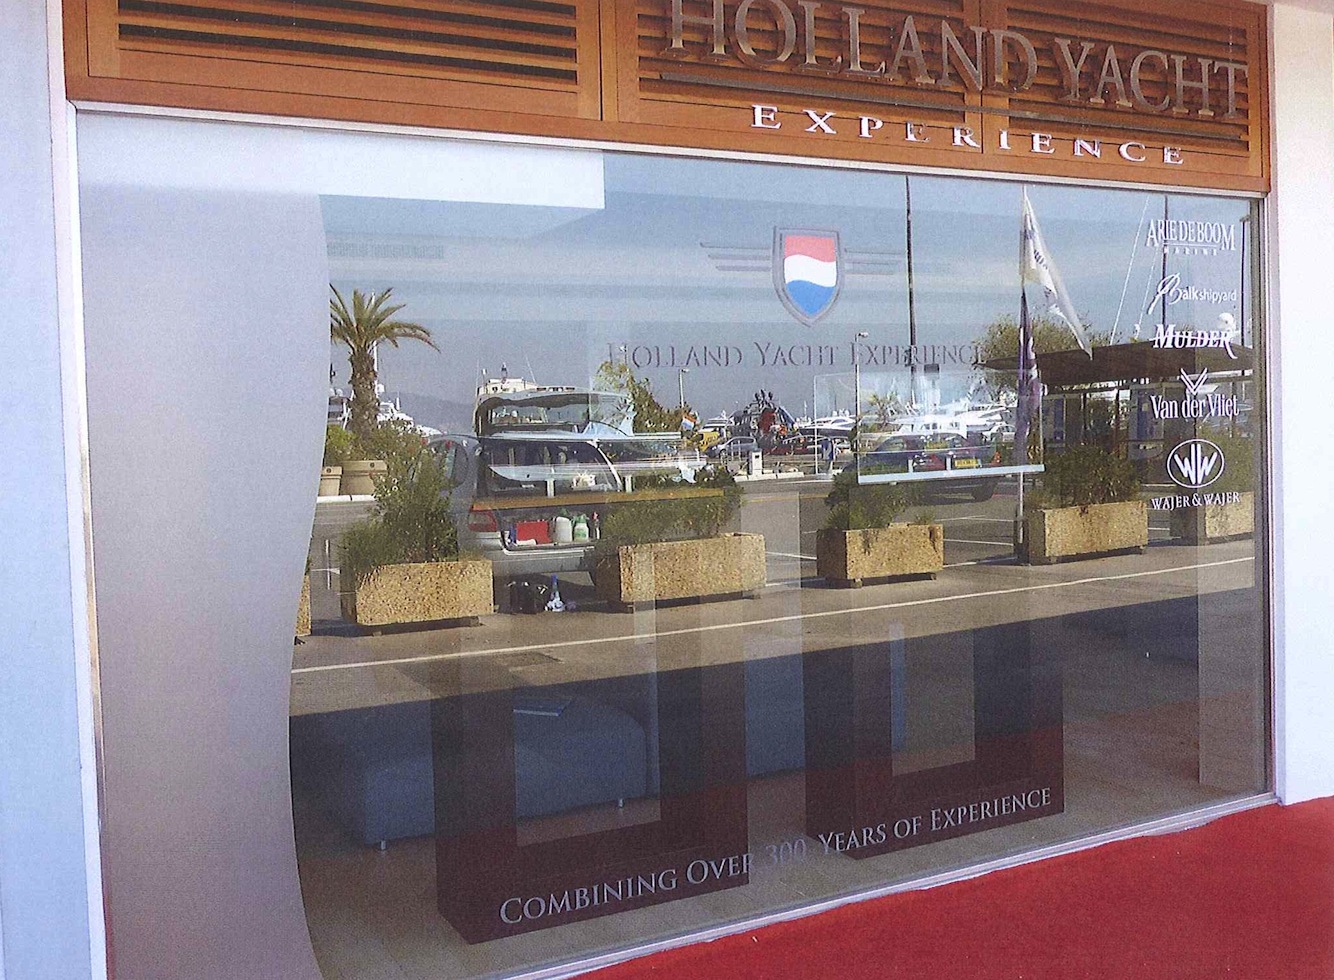 Image for article Cannes first stop for Holland Yacht Experience